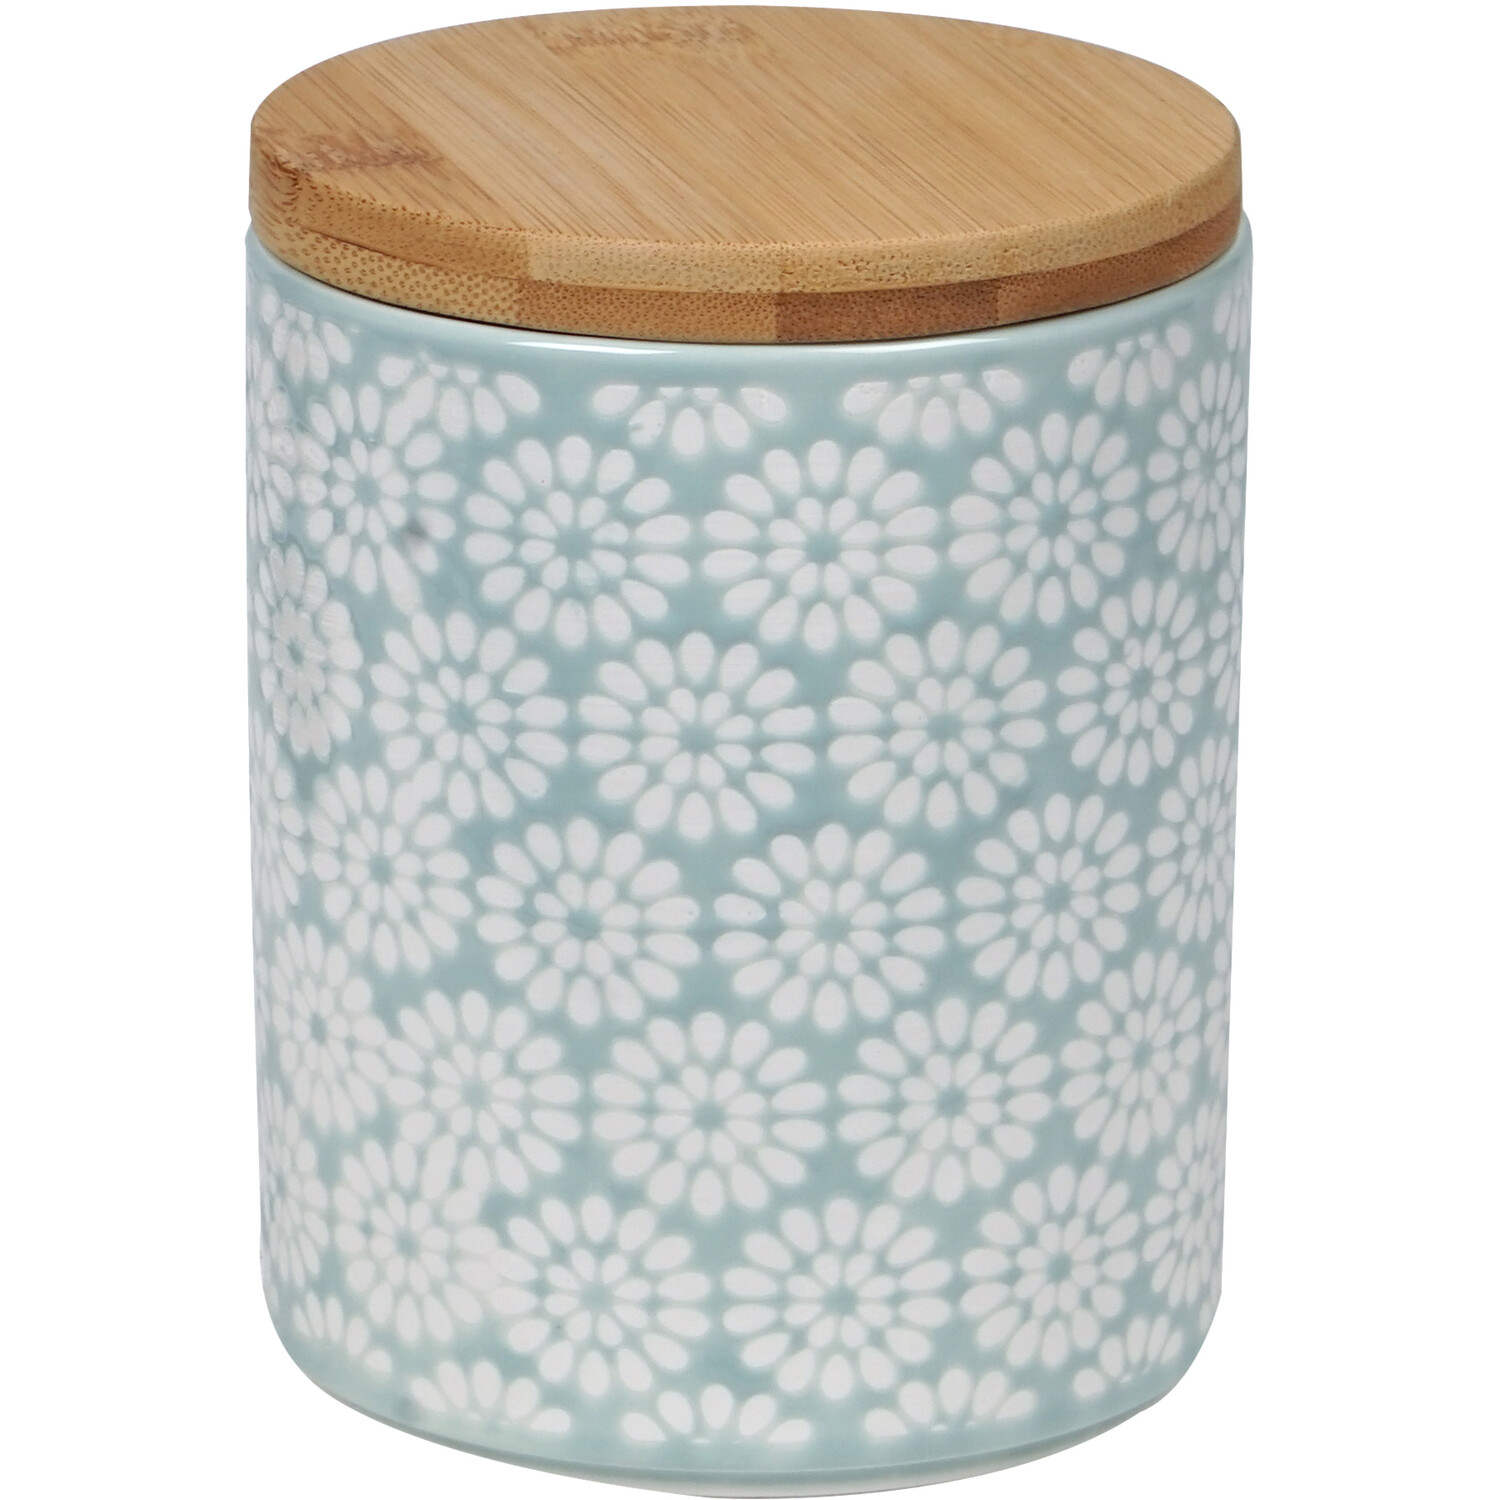 Geo Blossom Canister Image